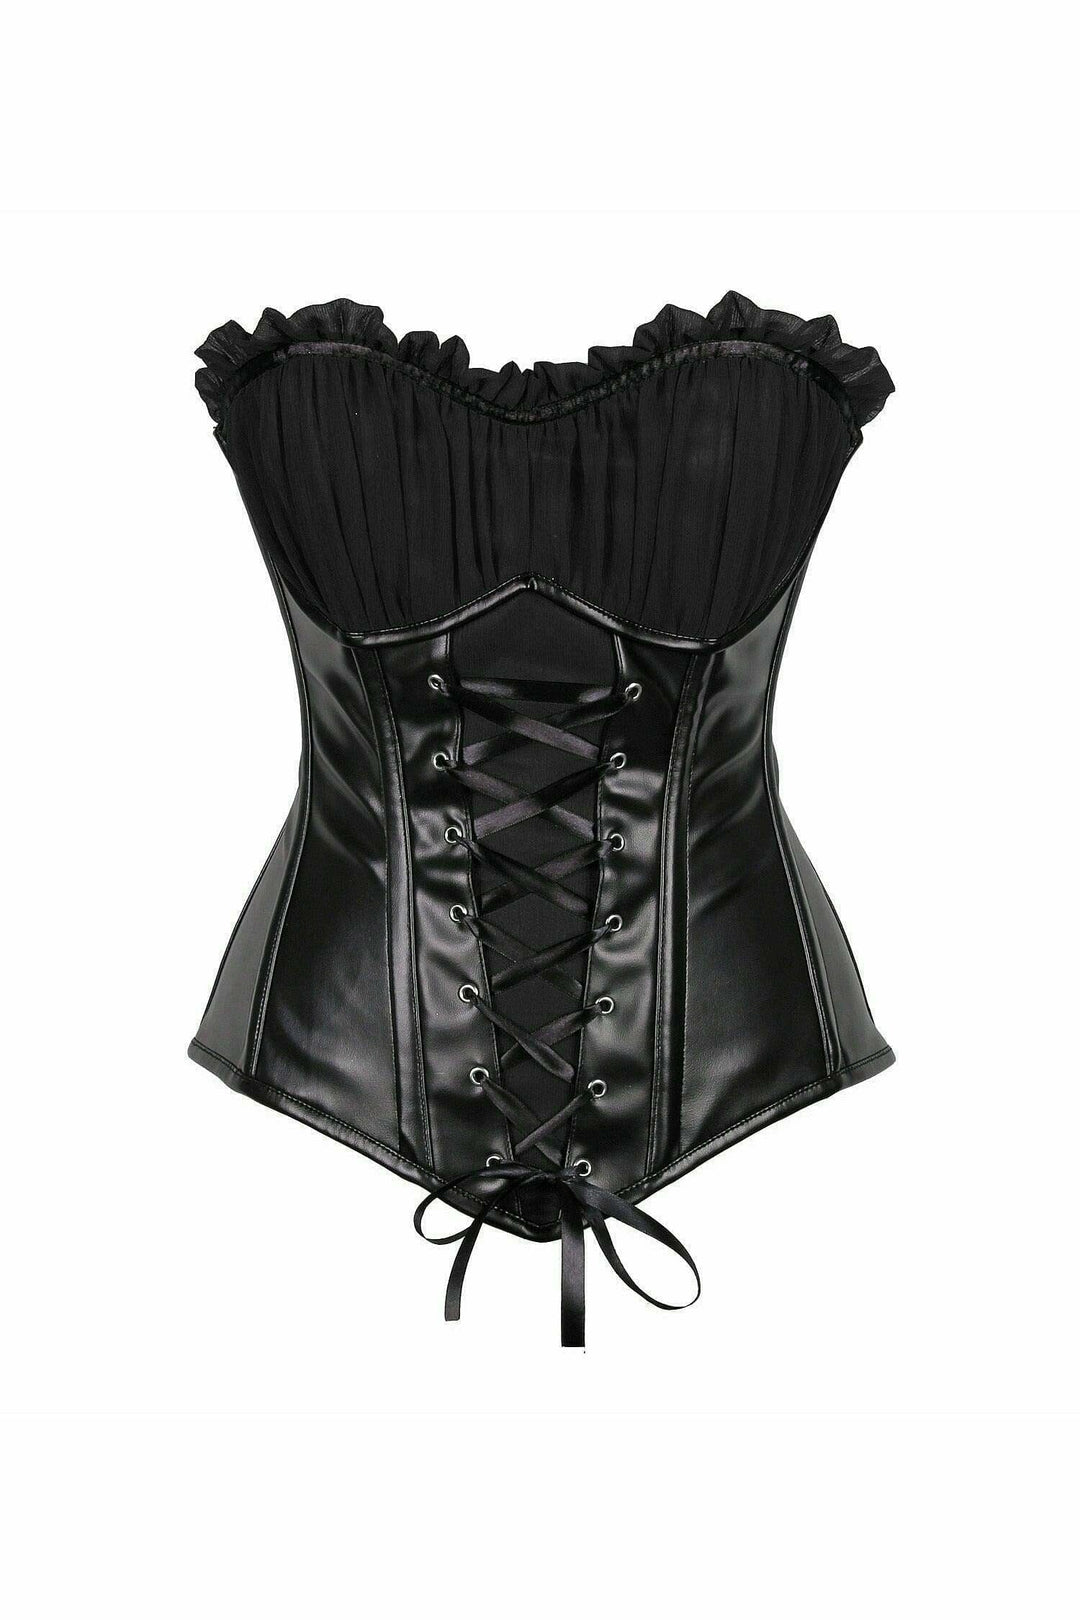 Top Drawer Black Faux Leather Lace-Up Steel Boned Corset-Steel Boned Overbust-Daisy Corsets-Black-S-SEXYSHOES.COM